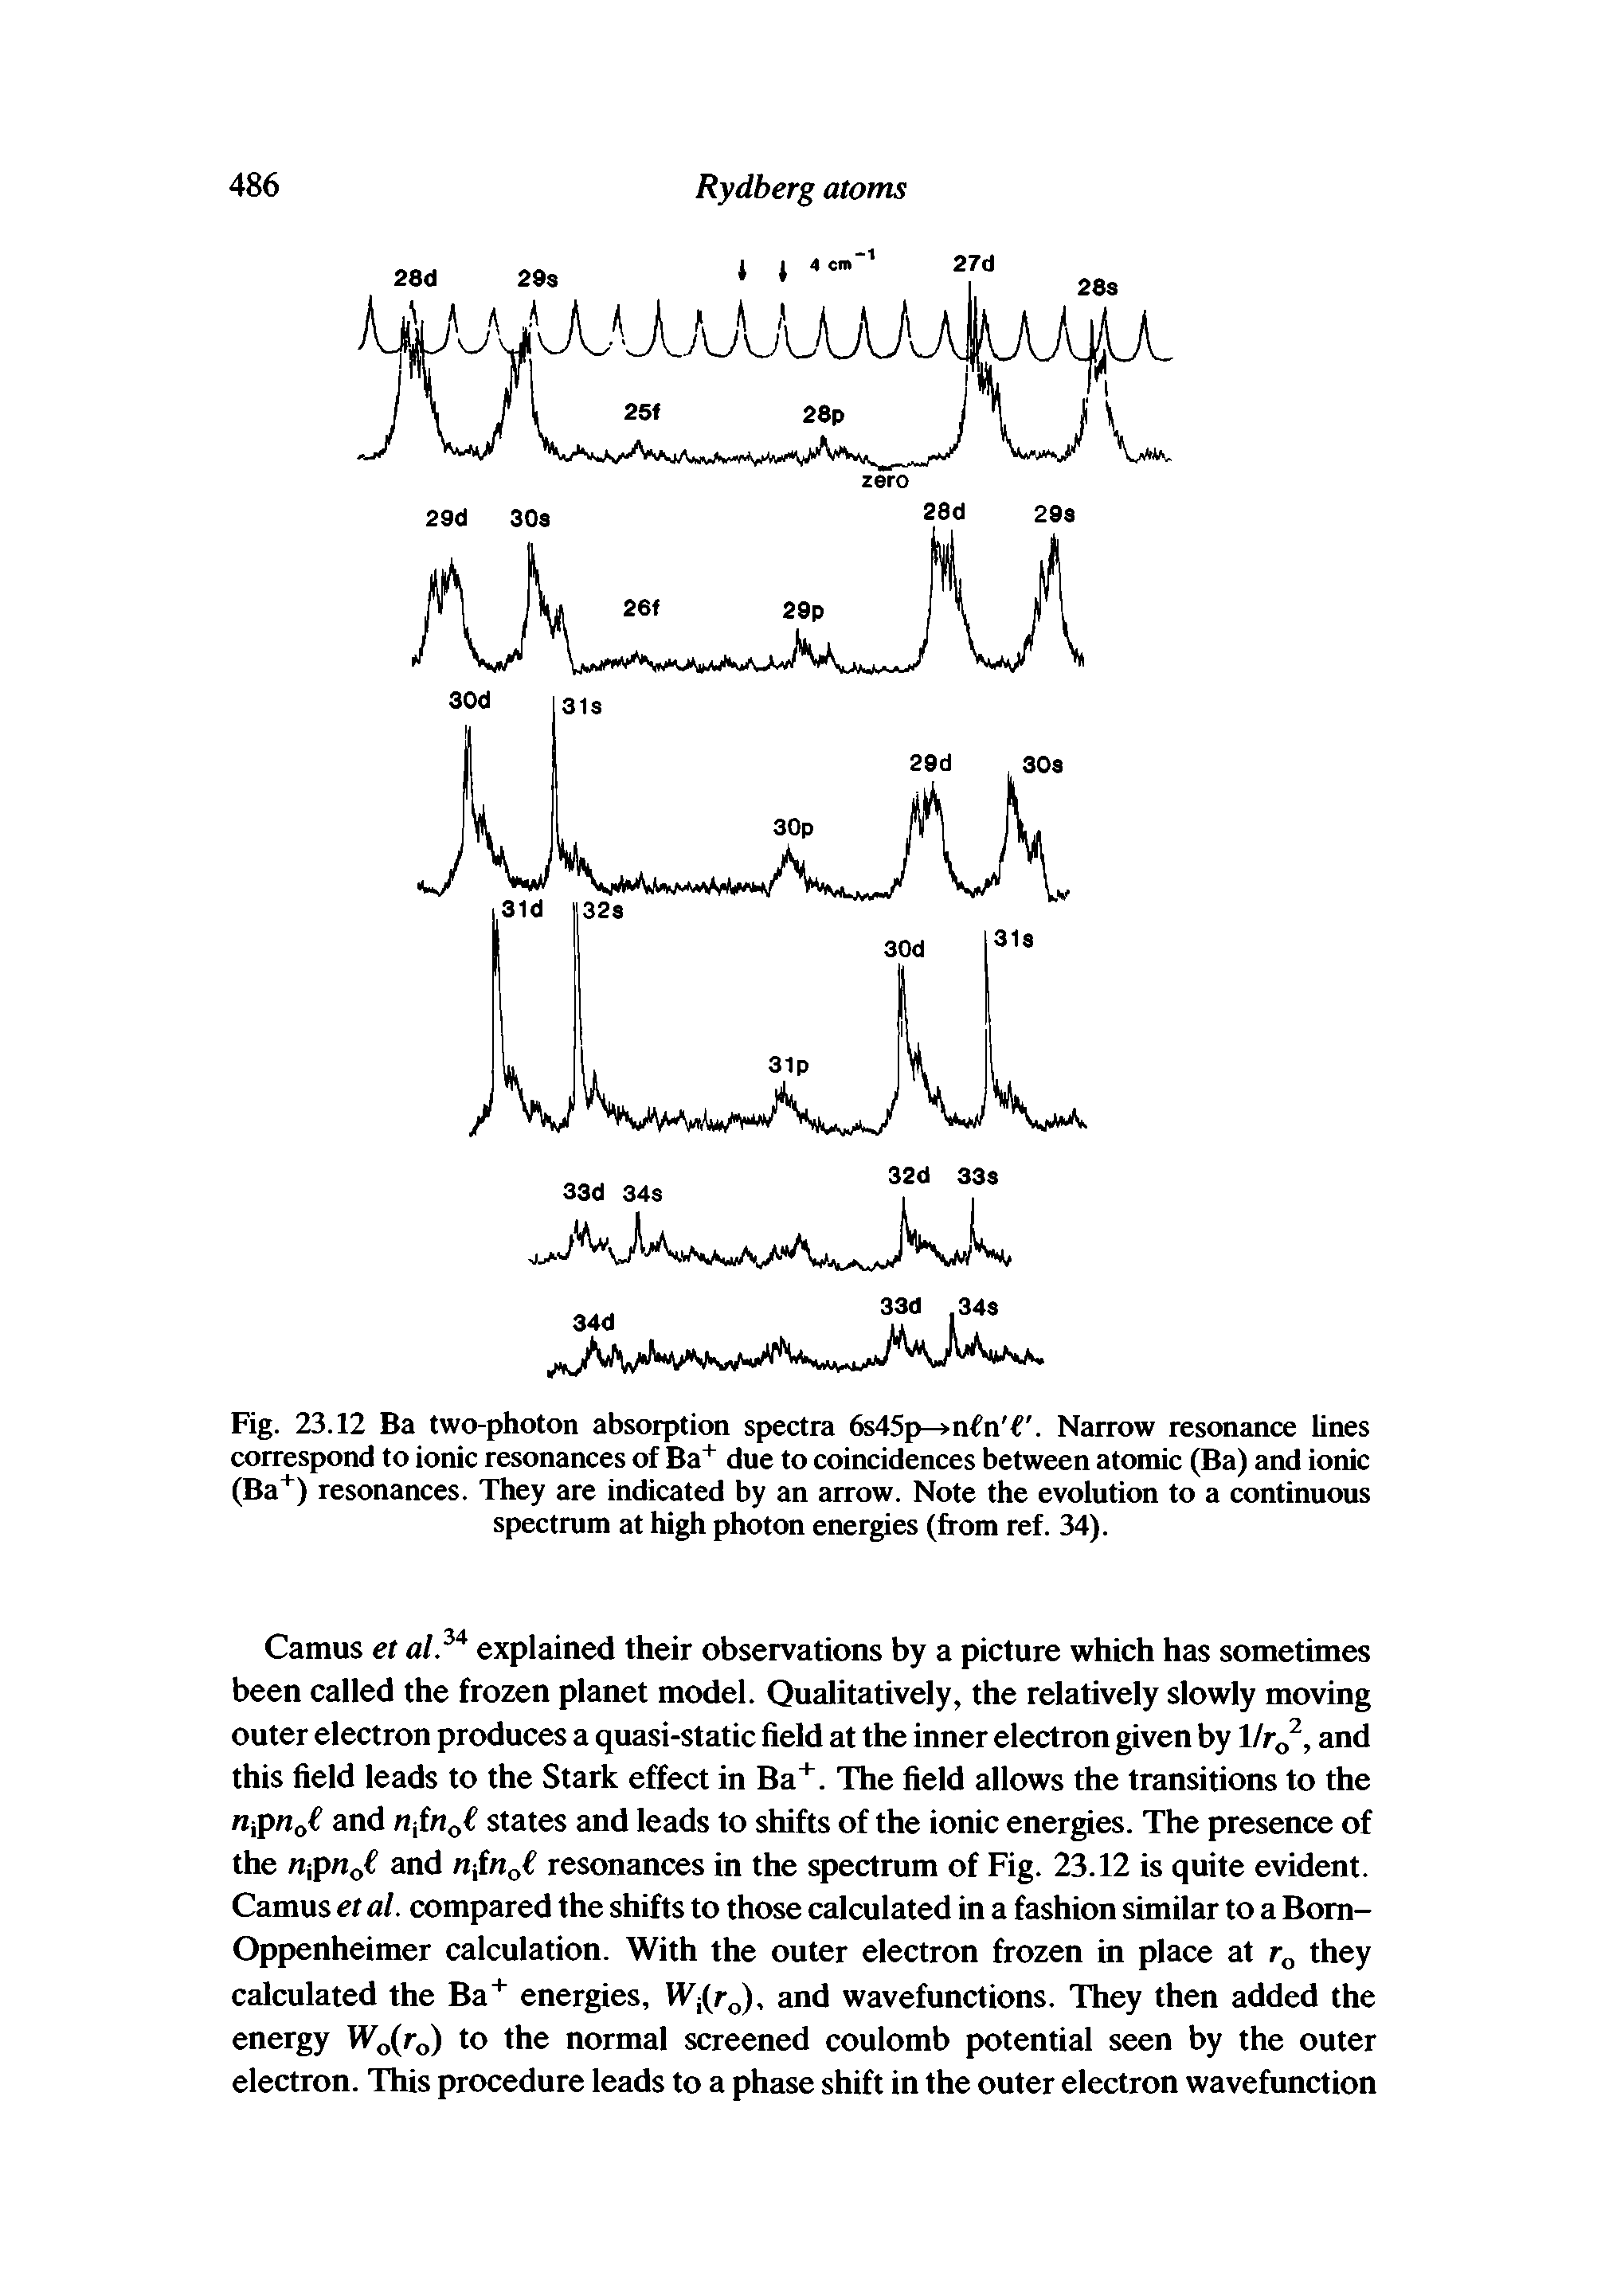 Fig. 23.12 Ba two-photon absorption spectra 6s45p—>nfn t". Narrow resonance lines correspond to ionic resonances of Ba+ due to coincidences between atomic (Ba) and ionic (Ba+) resonances. They are indicated by an arrow. Note the evolution to a continuous spectrum at high photon energies (from ref. 34).